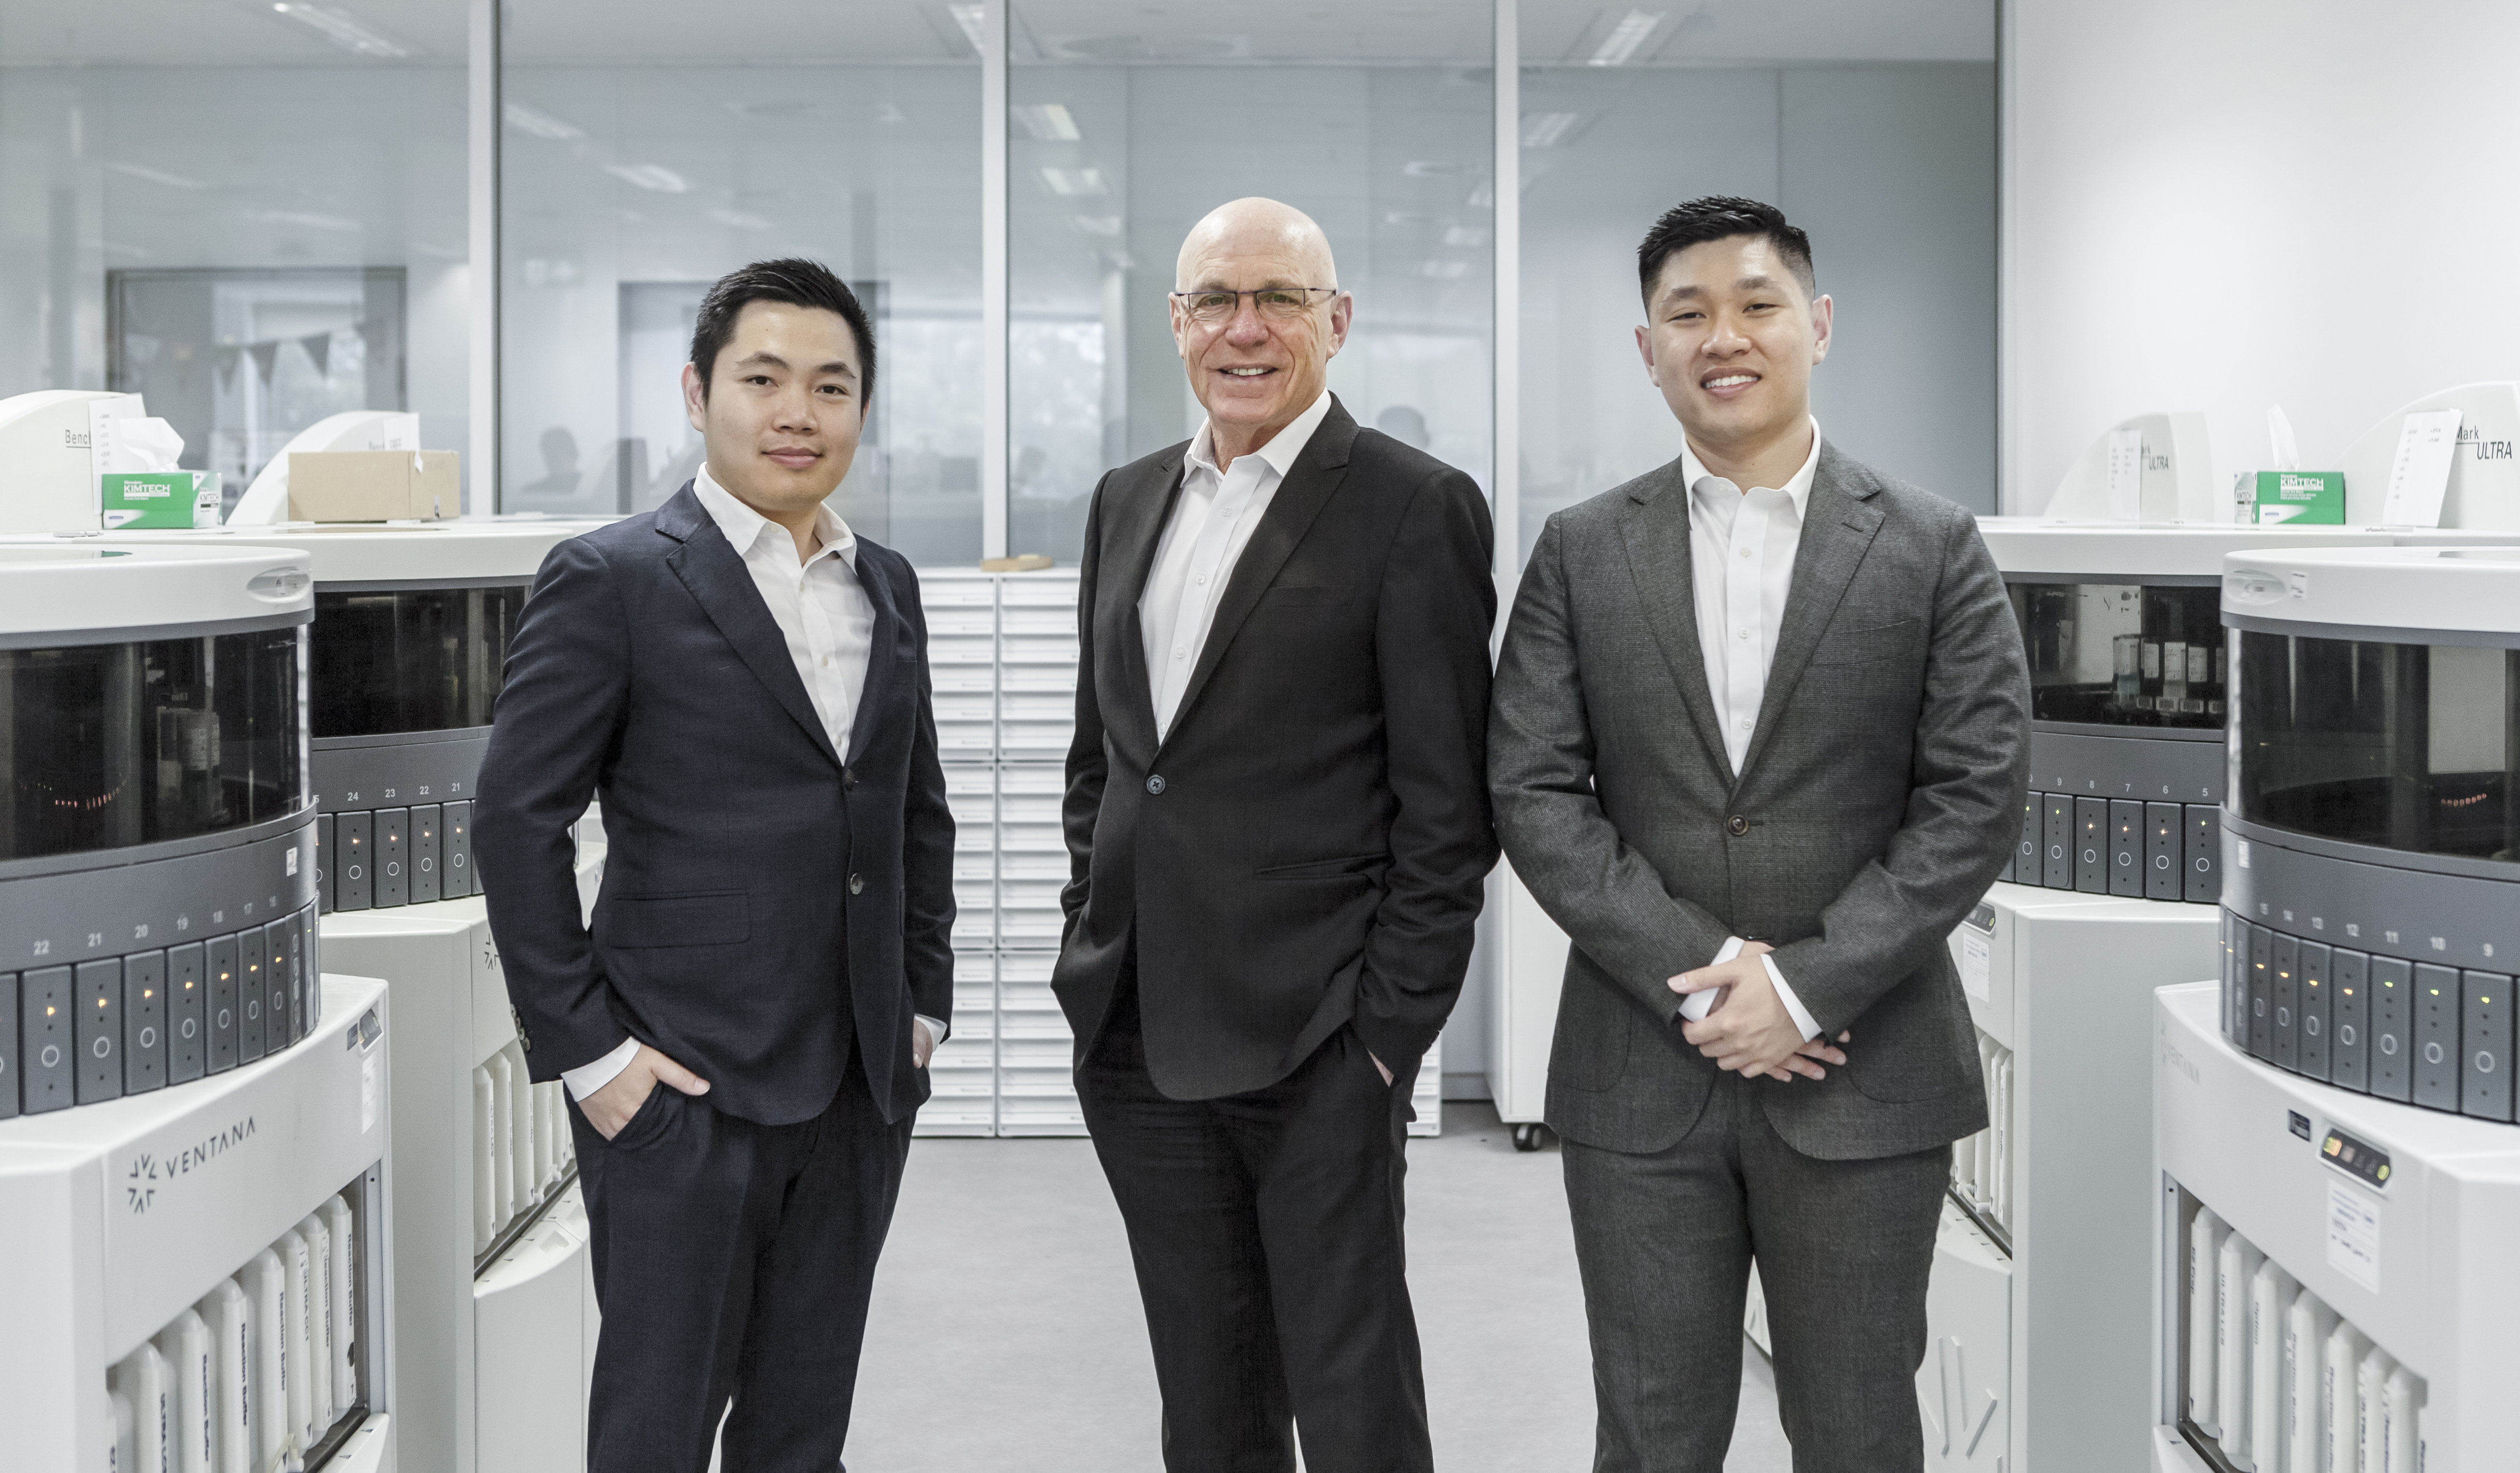 Sydney-based medtech startup Harrison.ai gets $129M AUD led by Horizons Ventures